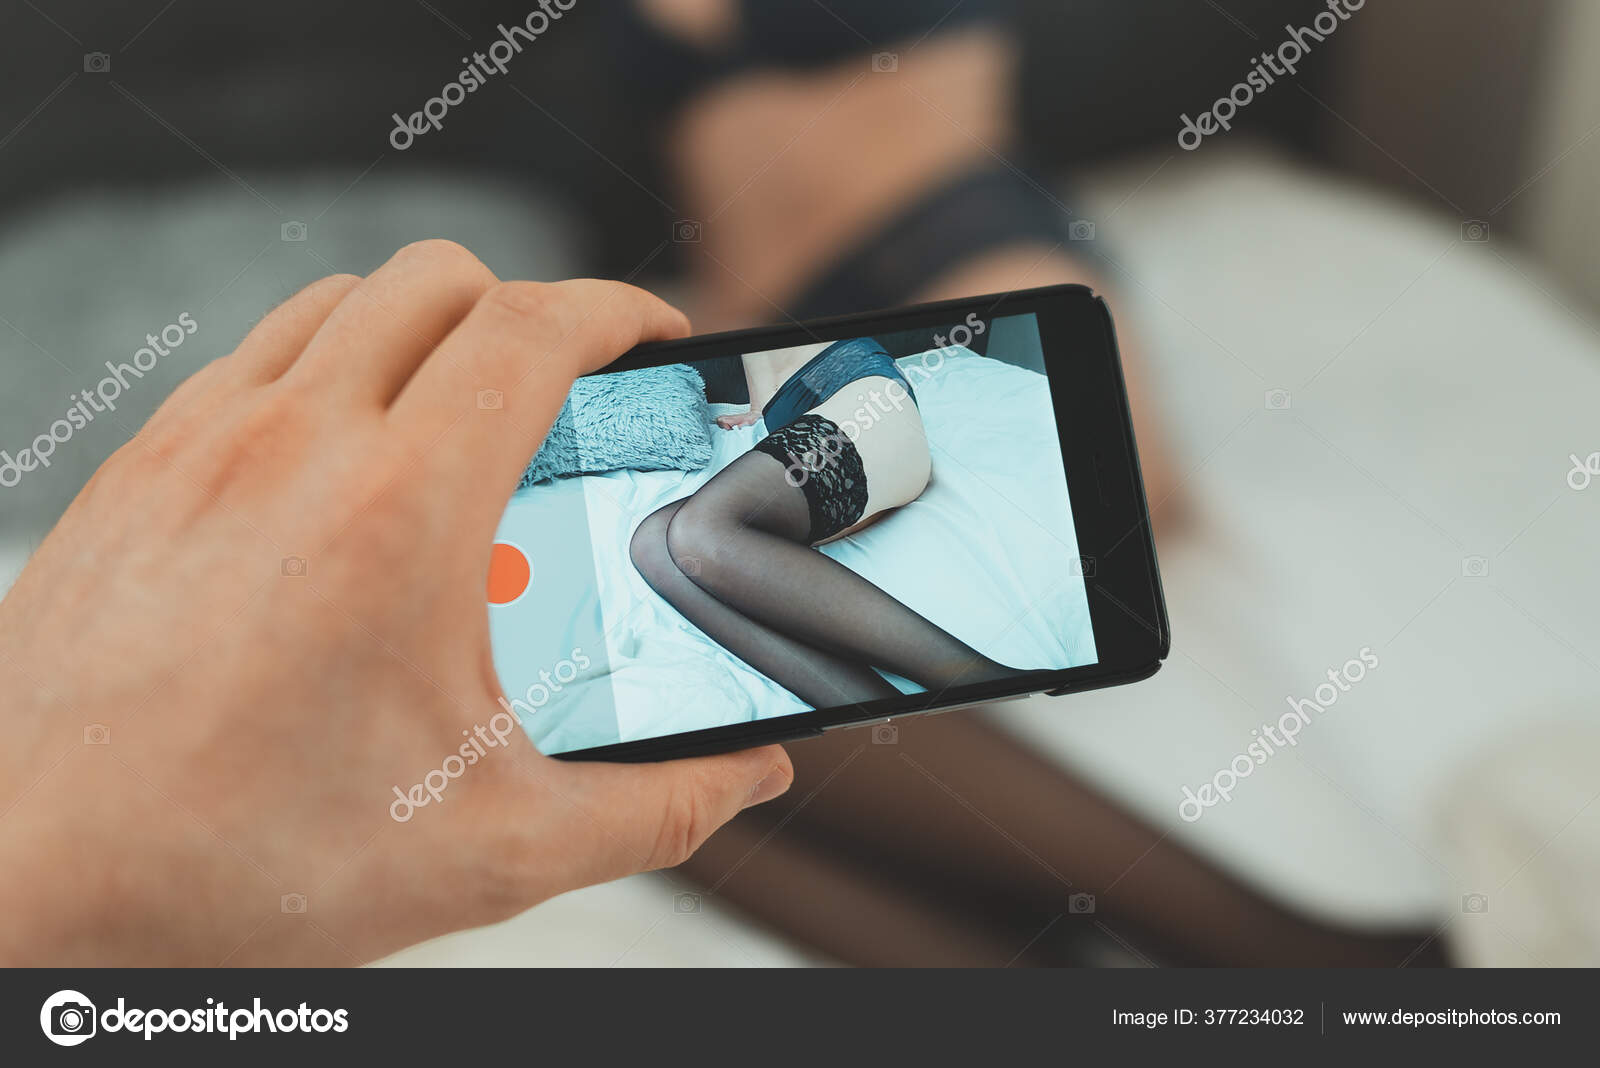 Man Recording Home Video His Girlfriend Stock Photo by ©mproduction 377234032